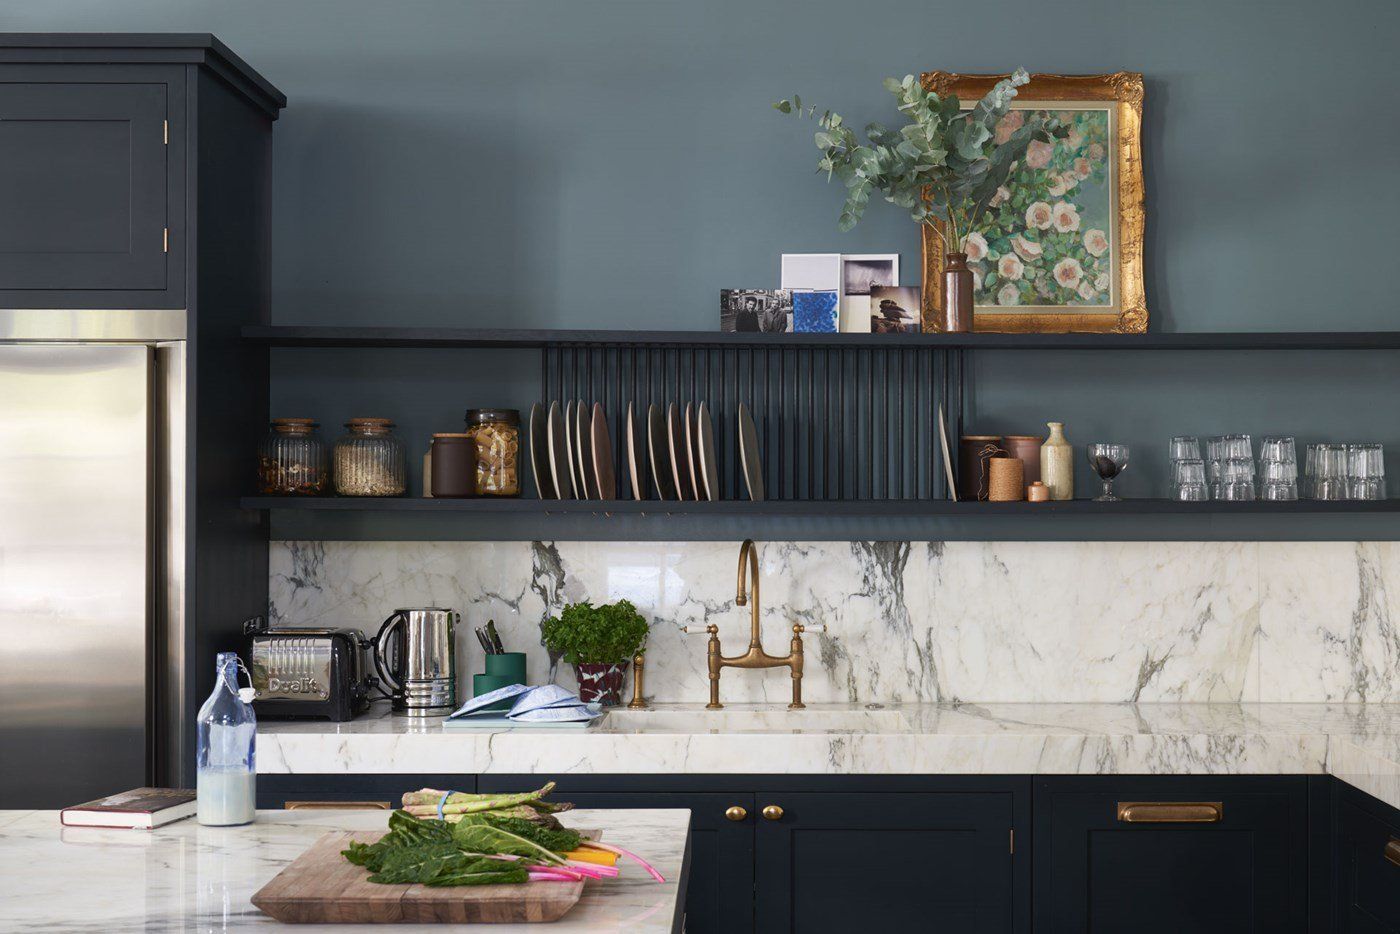 18 Kitchen Trends   What Styles Are In for Kitchens in 18